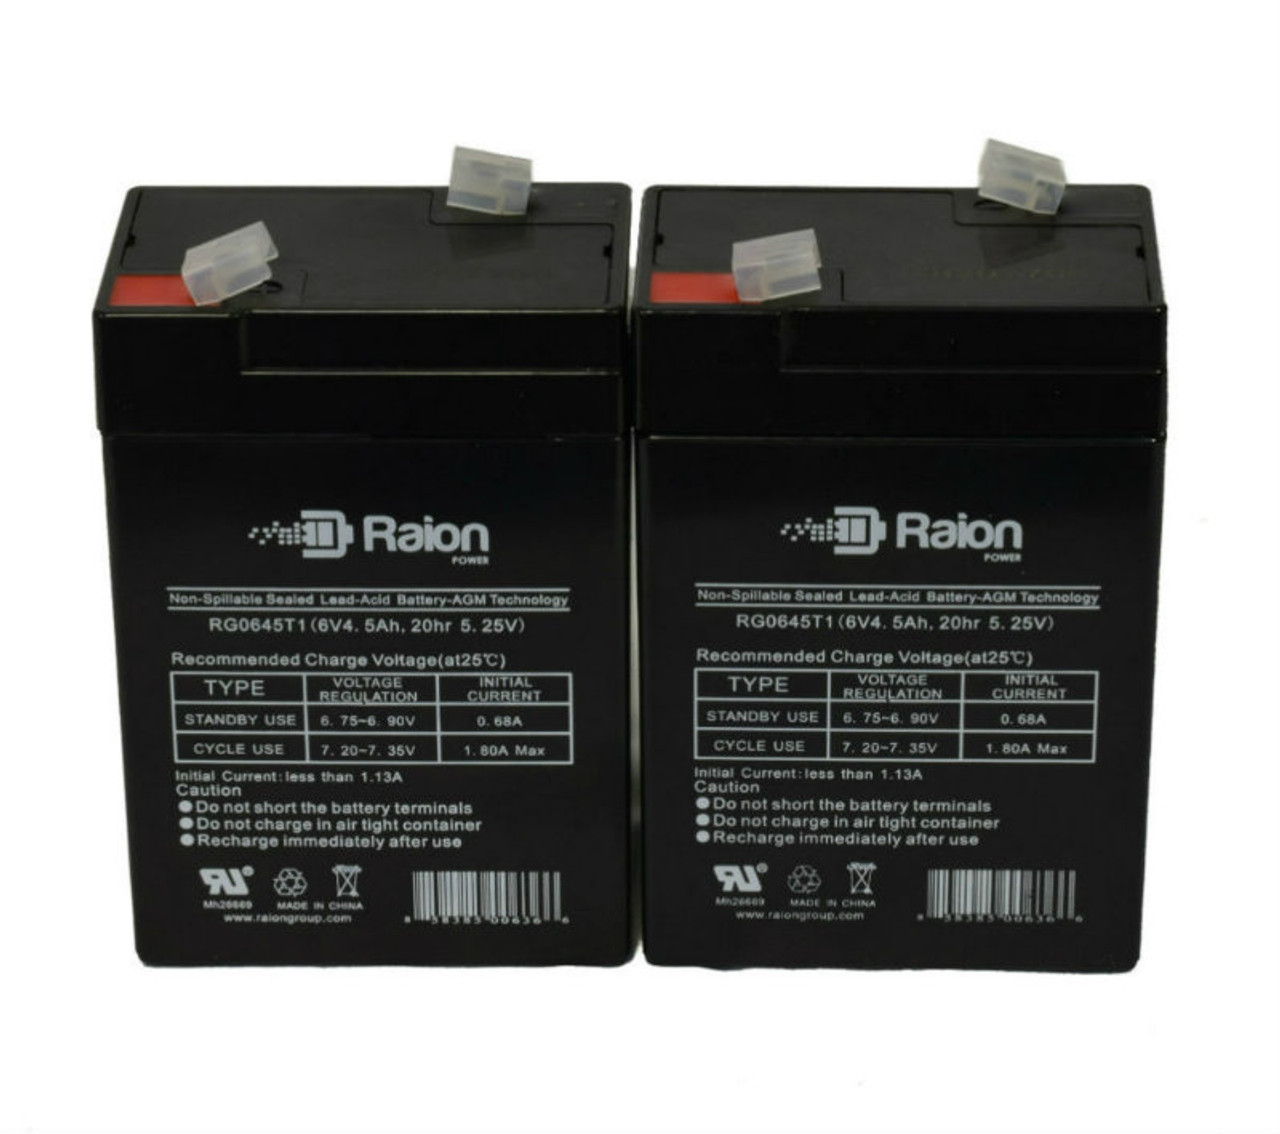 Raion Power 6 Volt 4.5Ah RG0645T1 Replacement Battery for Tianchang TC6-6 - 2 Pack